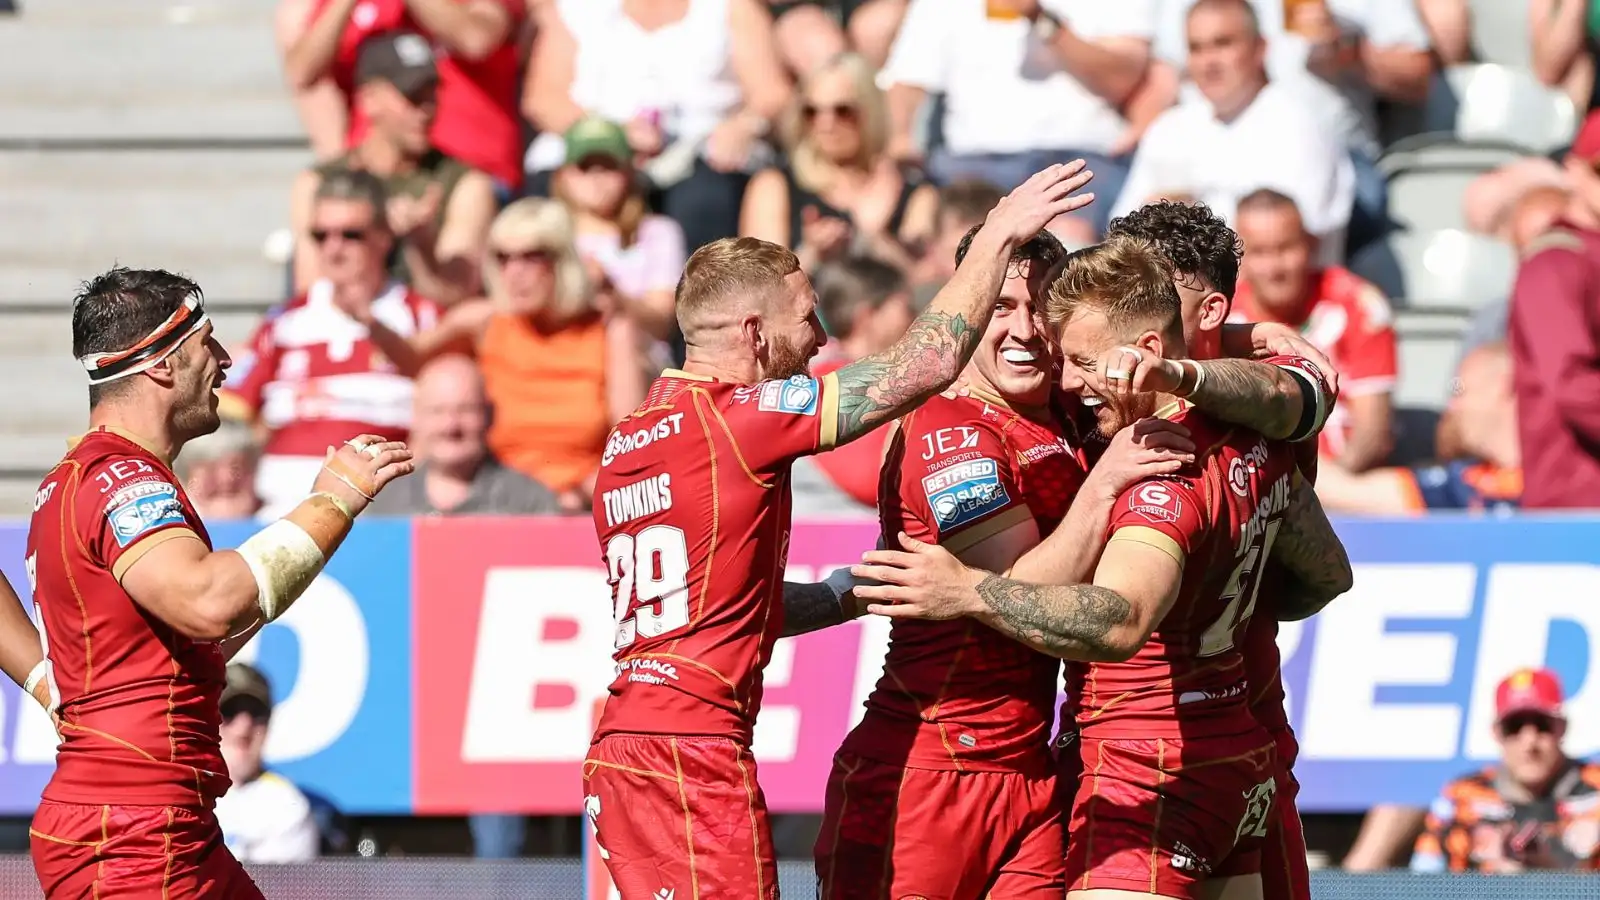 Sam Tomkins names “outstanding” player who he “mithers Shaun Wane to death about”